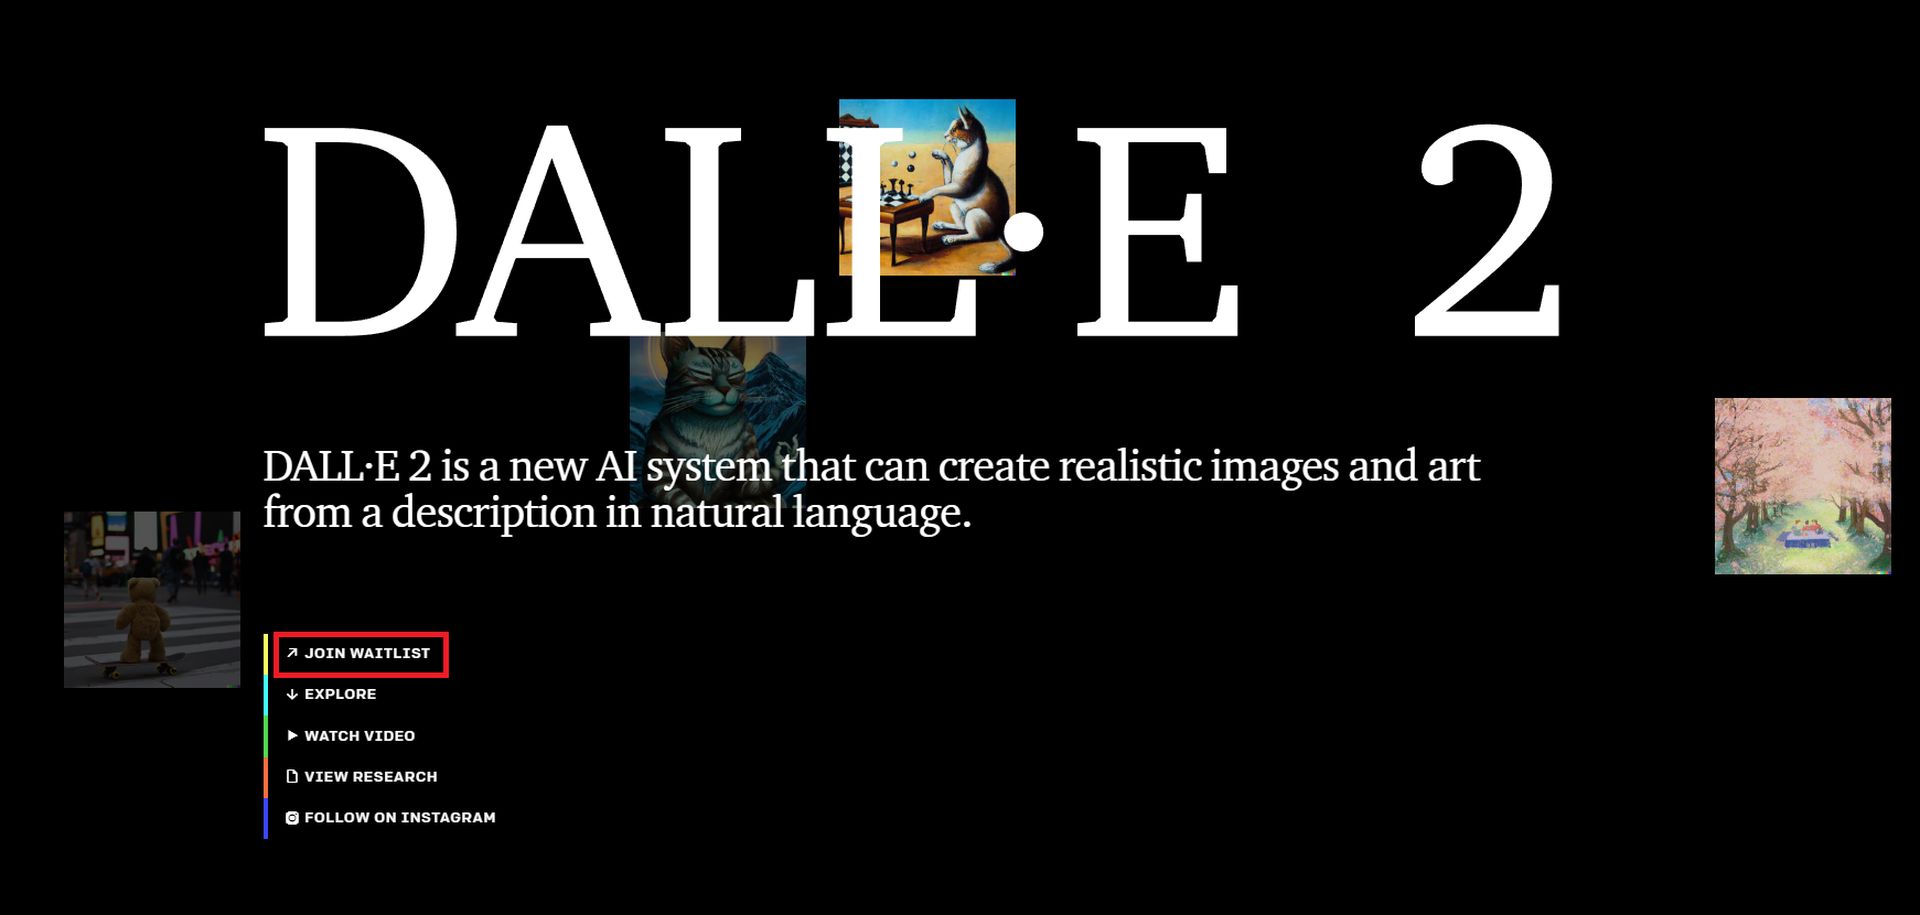 Today we are going to answer some important questions about the trending image generator AI, DALL-E 2. Can you use it, is it free, how does it work and more details will be discussed below.